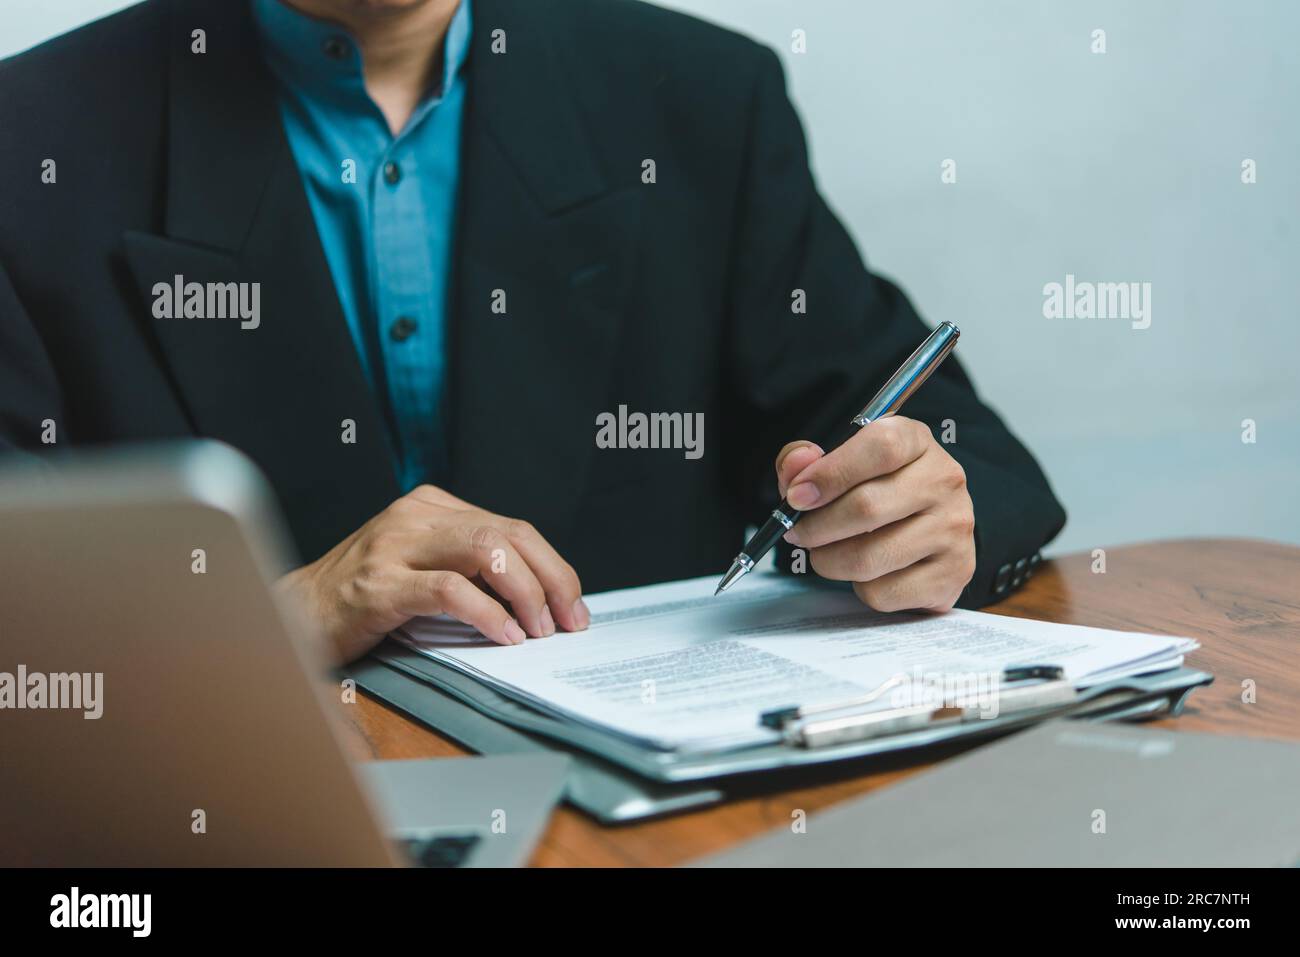 businessman agree to make deal signing document, sale contract, employment job or legal transaction contract at desk Stock Photo